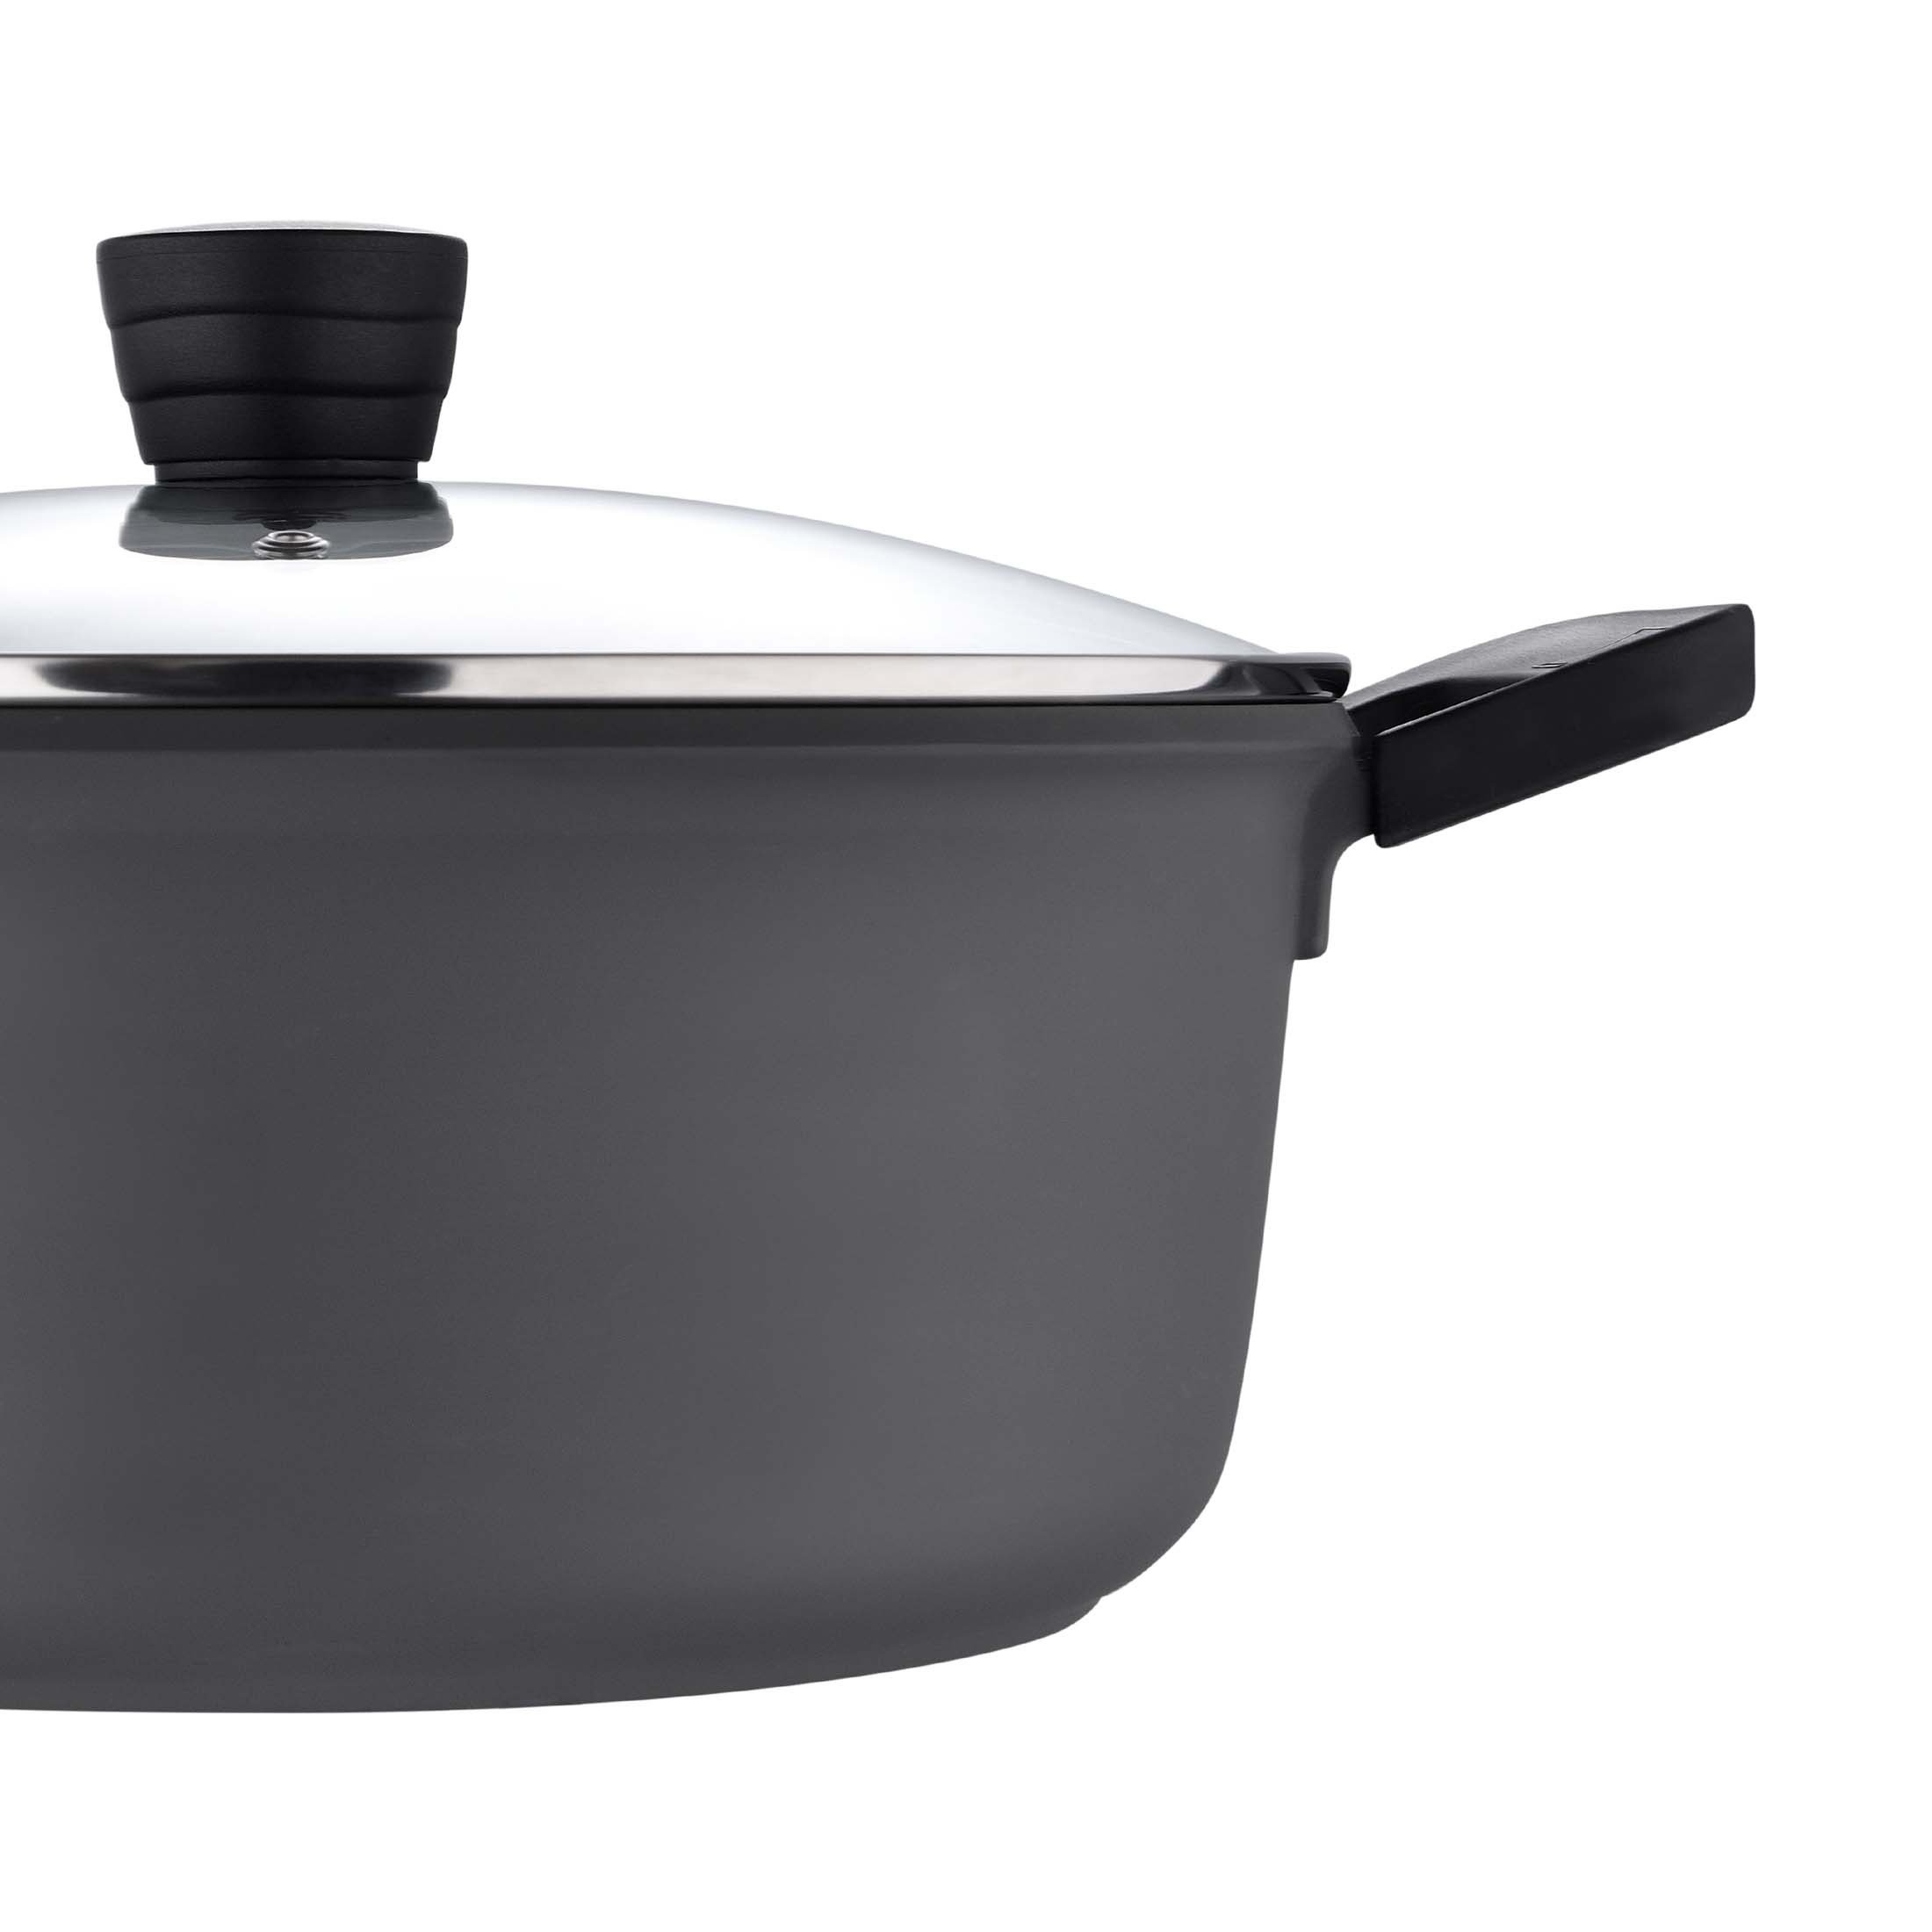 Buy Black Cookware for Home & Kitchen by BERGNER Online